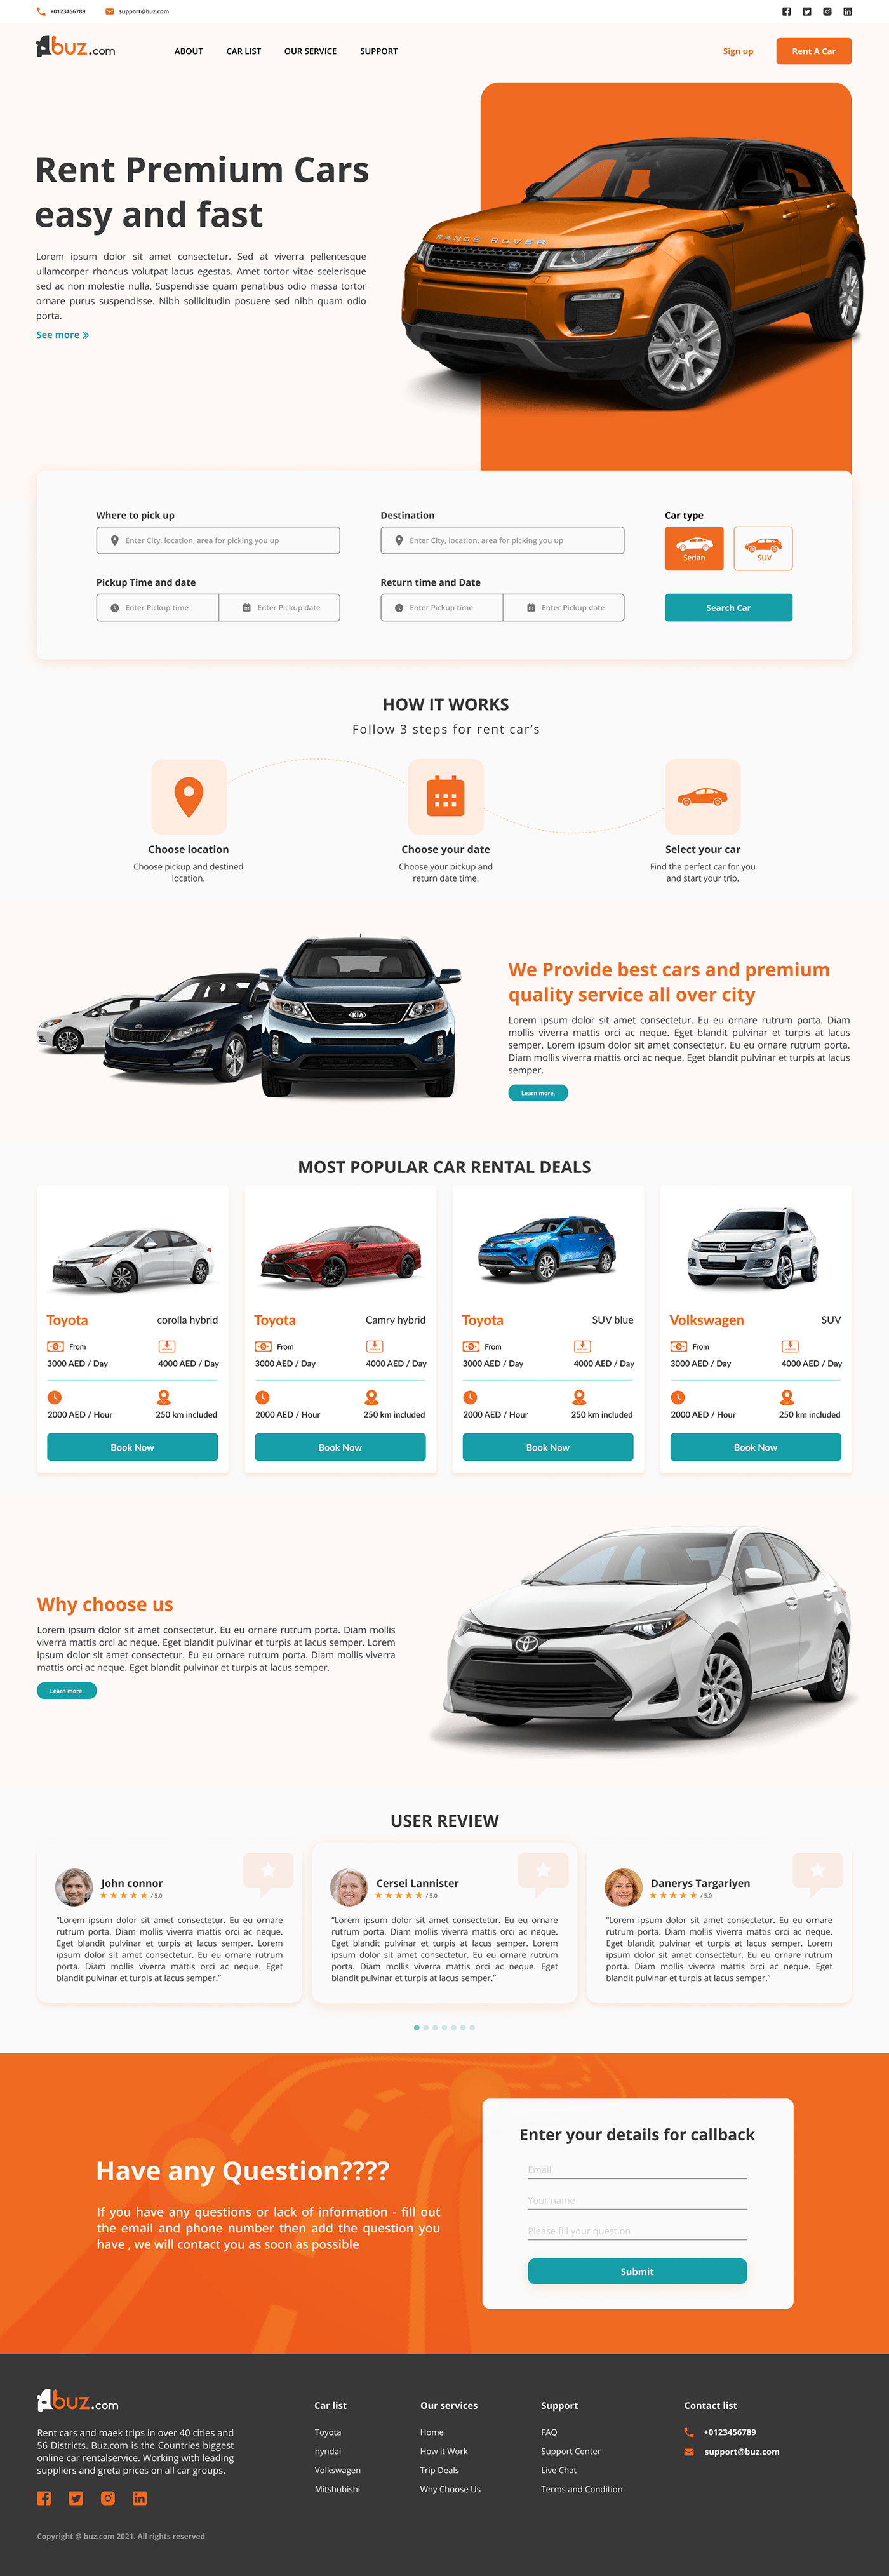 Car rental user experience Booking Process Visual Appeal Car Listing Booking Experience Sleek Interface user friendly